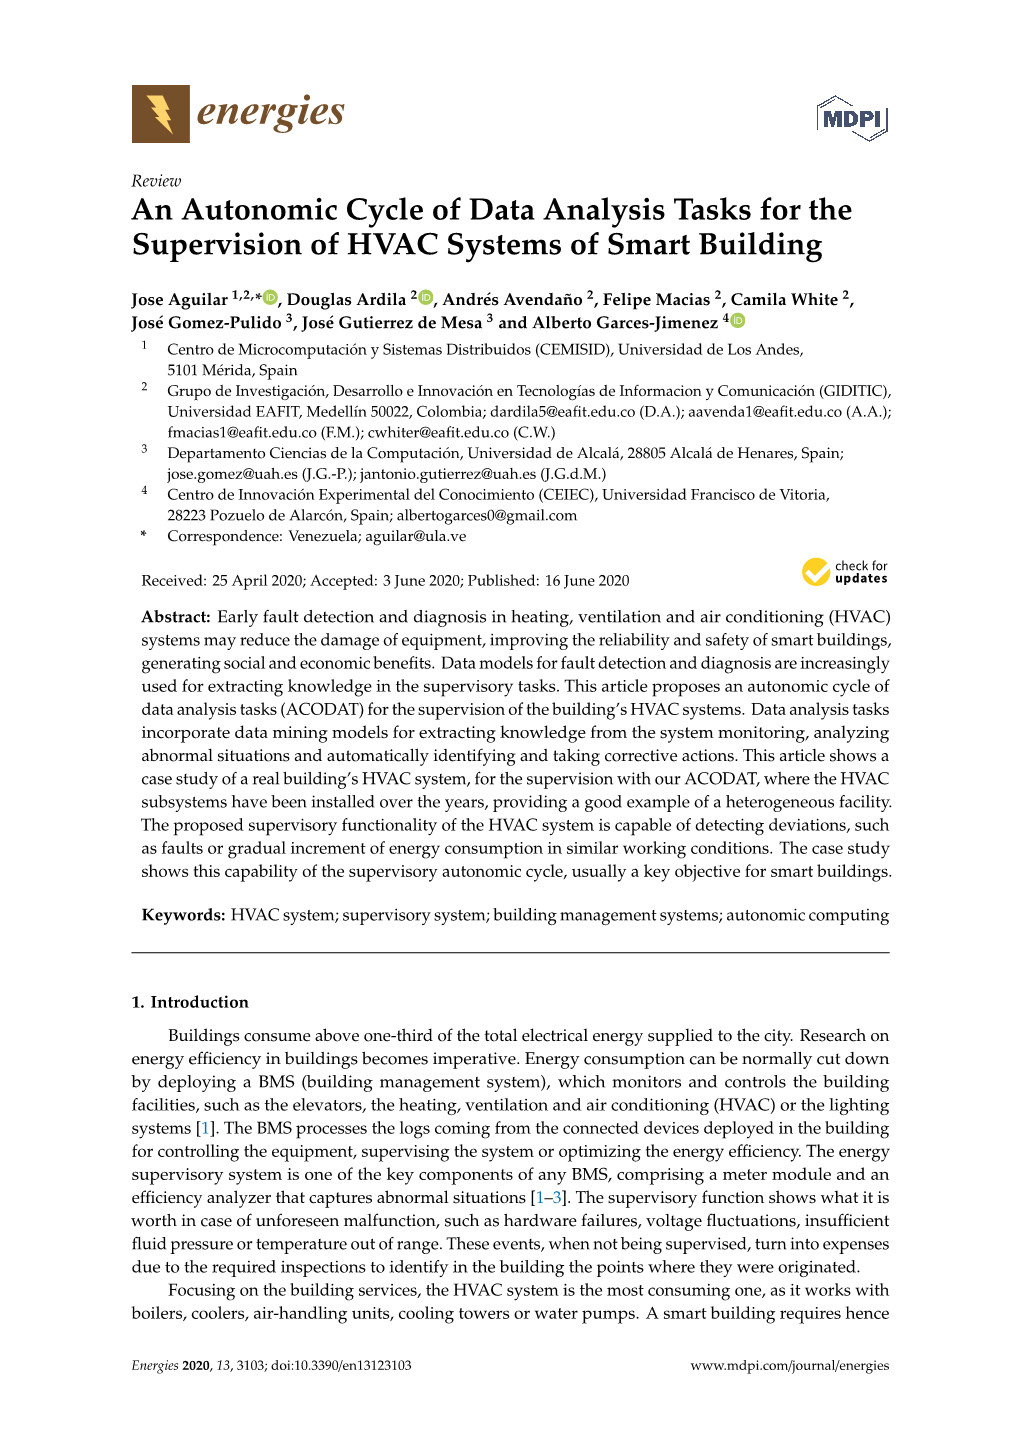 An Autonomic Cycle of Data Analysis Tasks for the Supervision of HVAC Systems of Smart Building